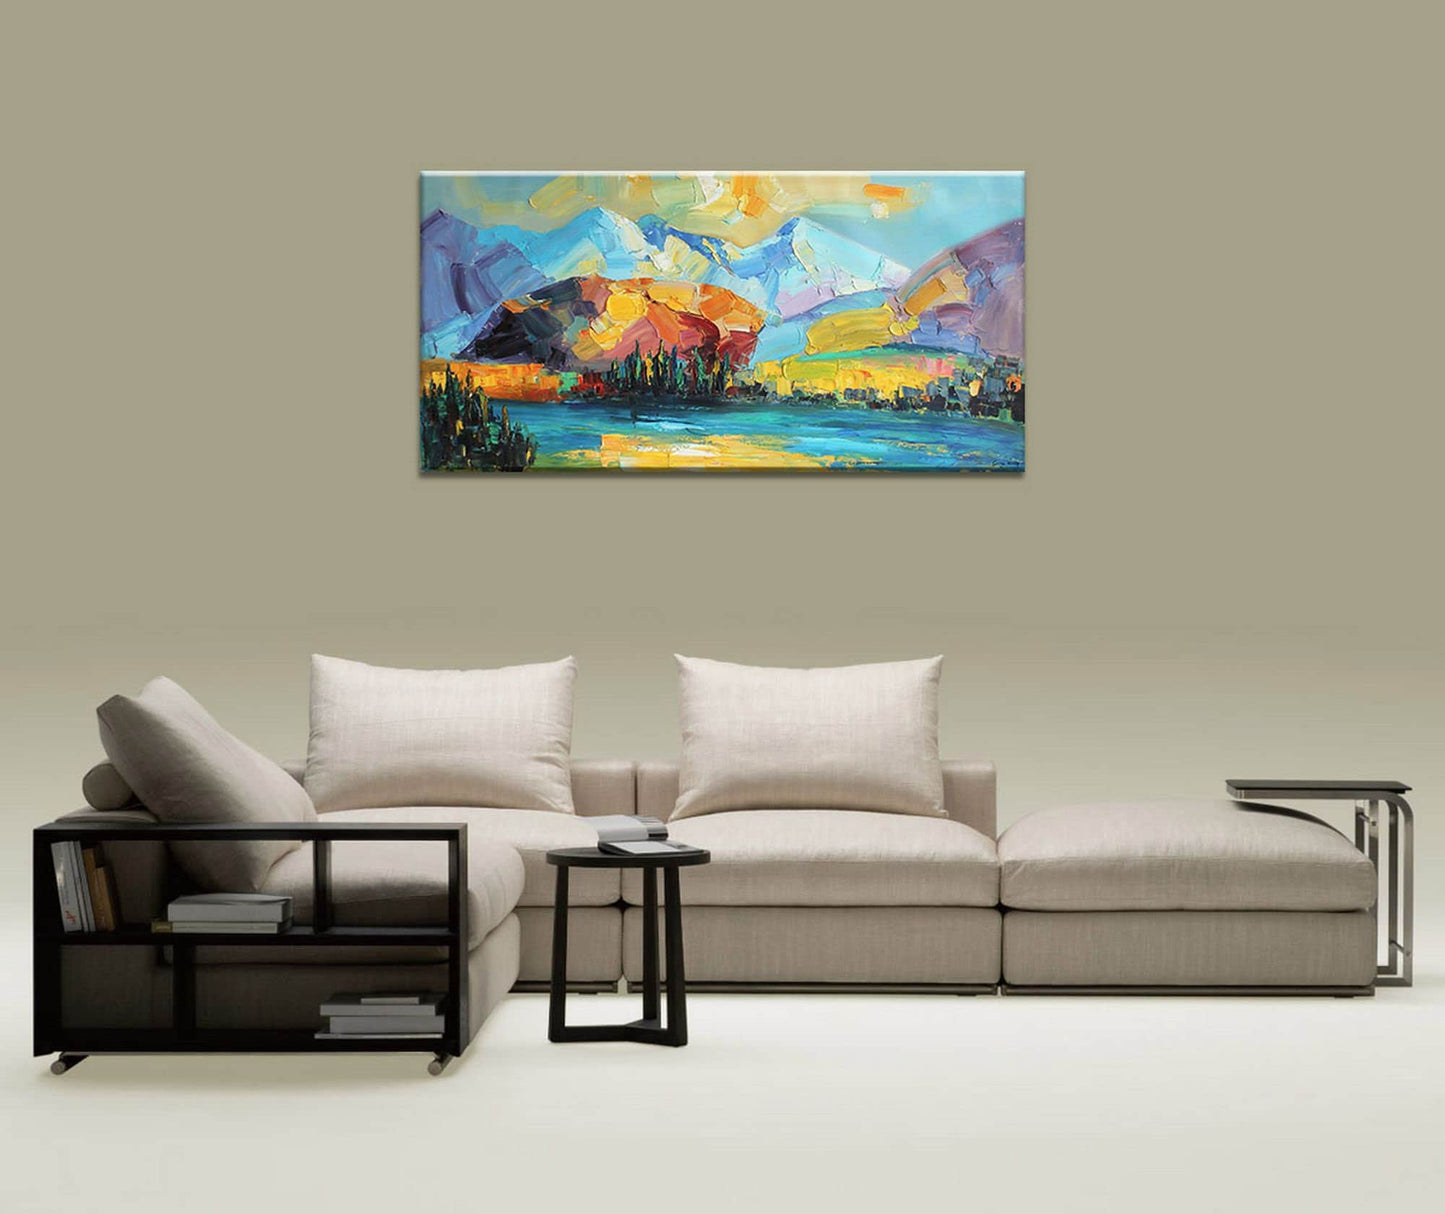 Abstract Landscape Painting, Large Art, Canvas Art, Large Landscape Painting, Master Bedroom Decor, Contemporary Art Large Wall Art Painting